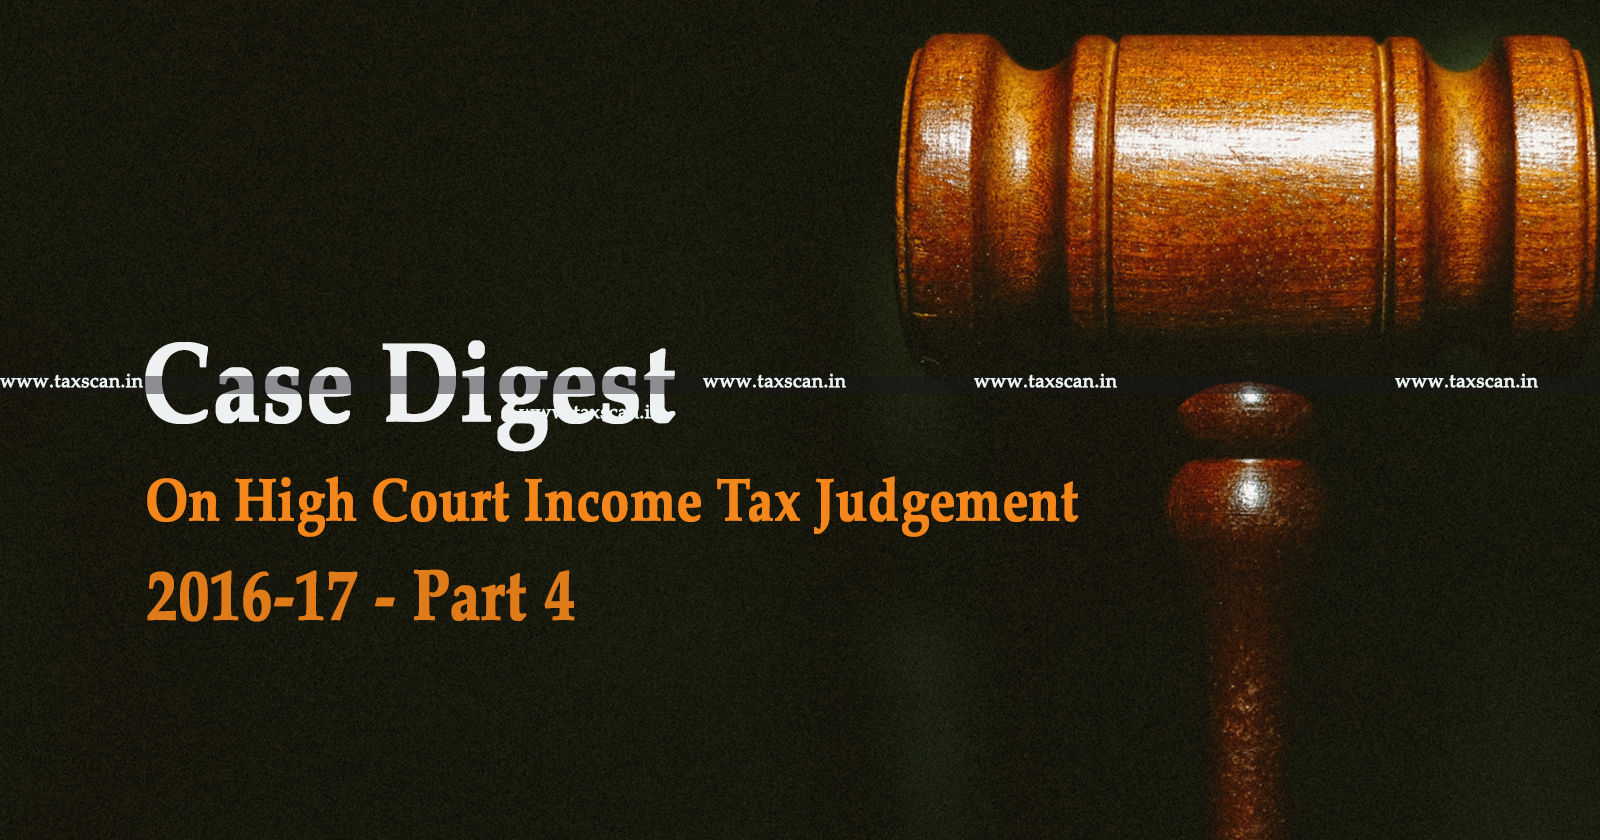 Case Digest On - High Court Income Tax Judgement - TAXSCAN